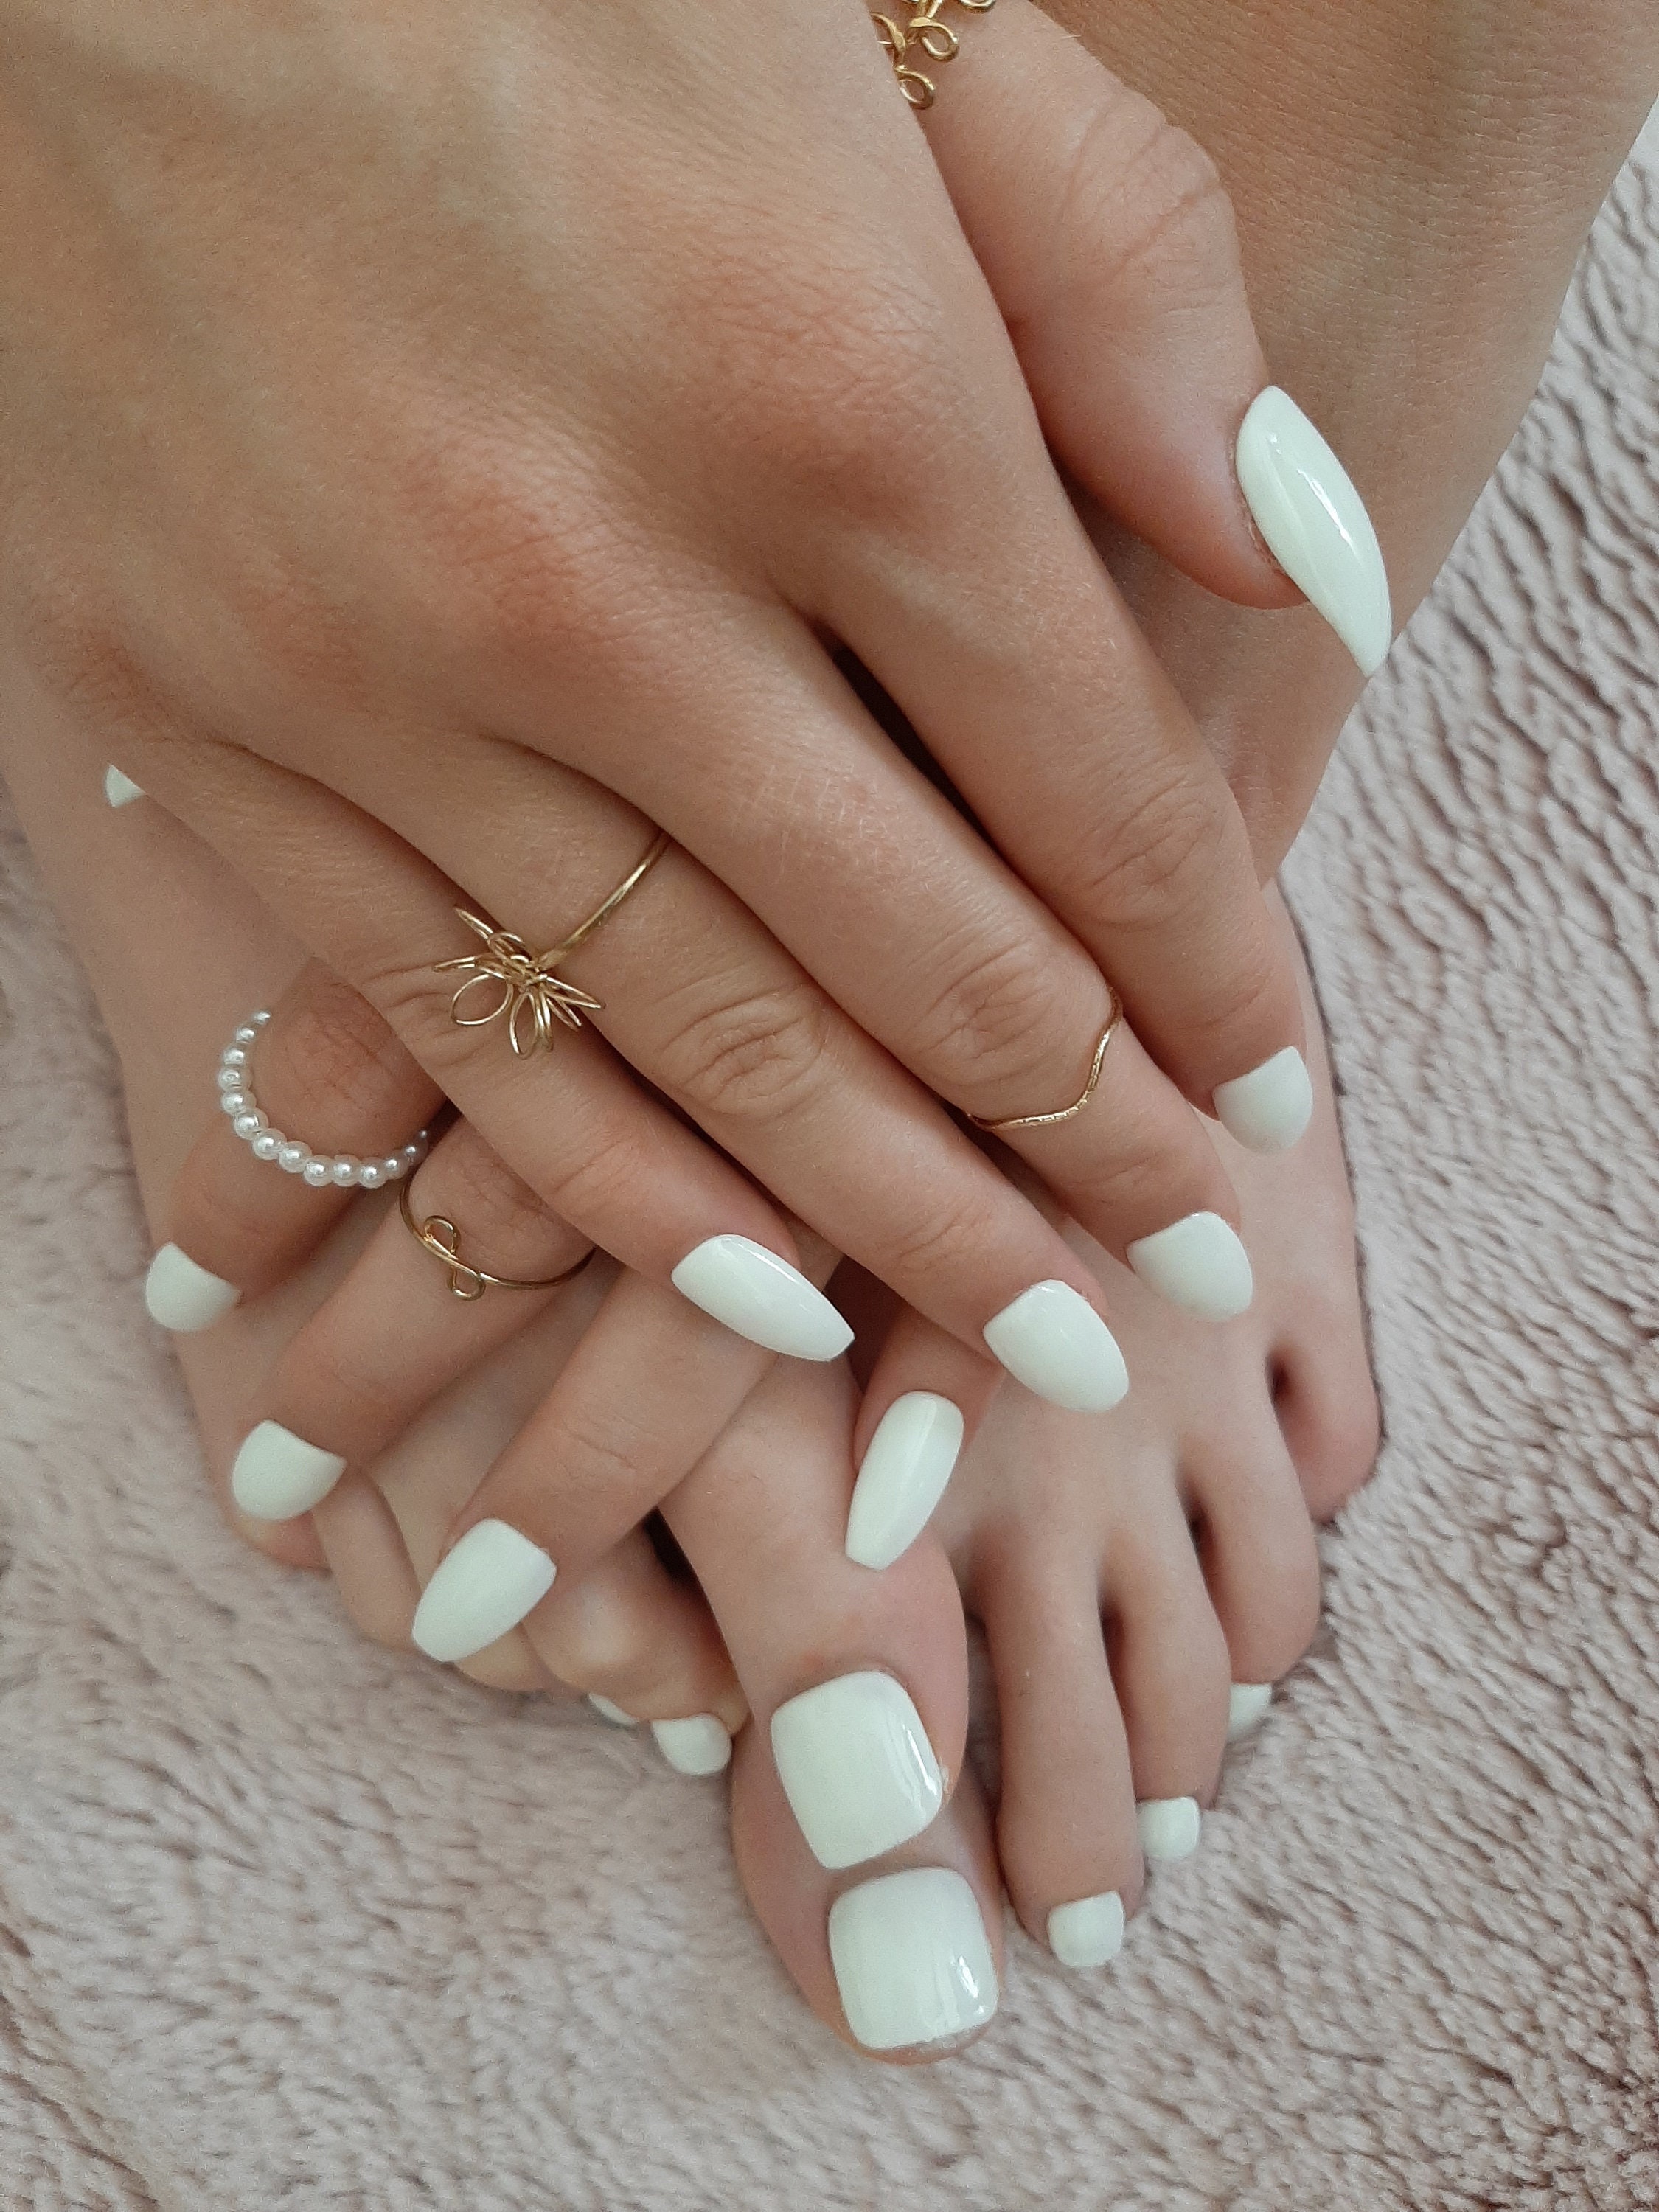 Gimme All You Got Set All White Toe Press on Nails Full Set No Sizing Kits  Needed Toe Nails White Toes Nails White Short Nails -  Canada